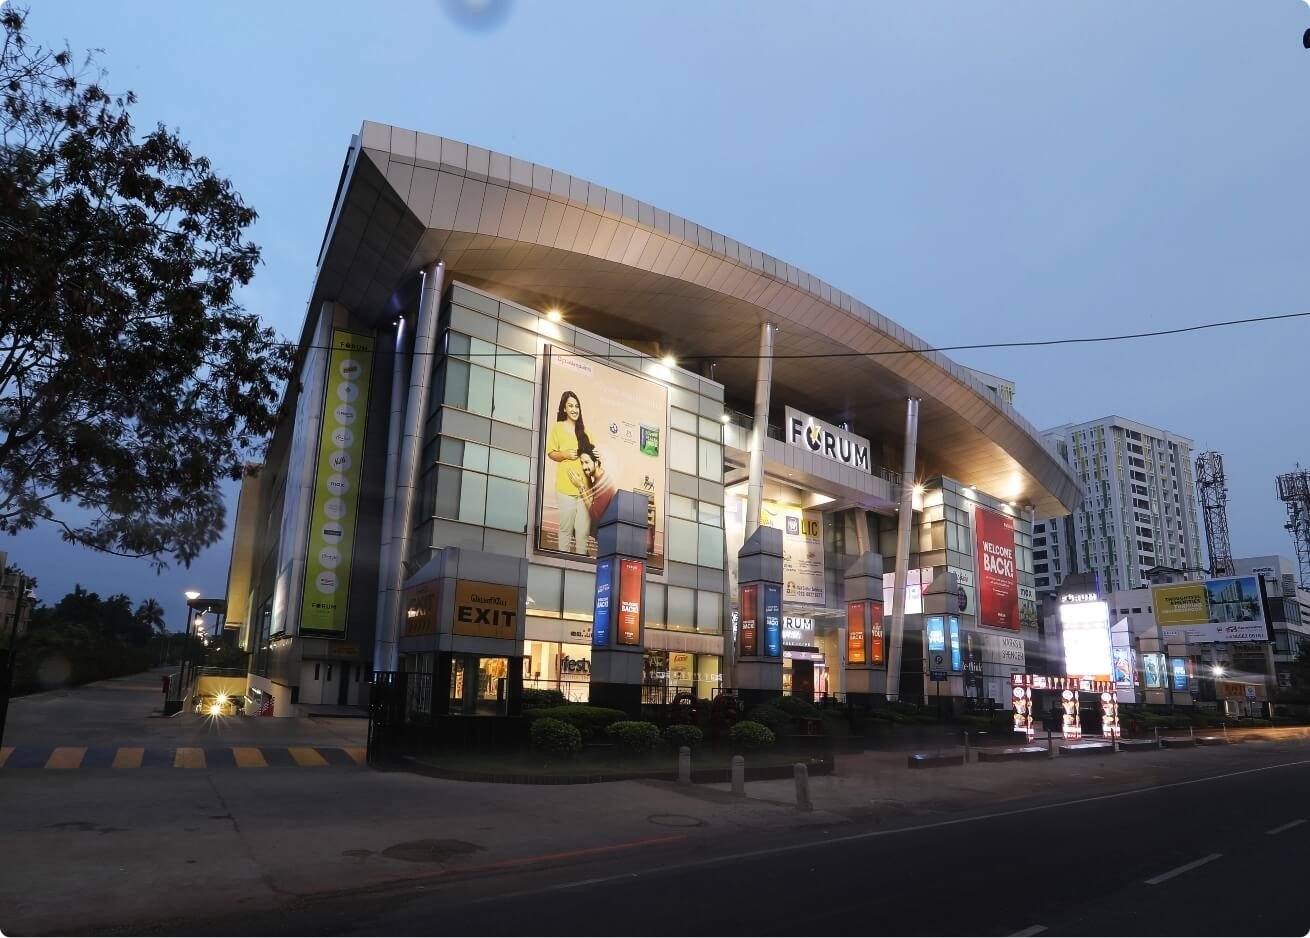 What attracts shoppers to the Forum Nexus Vijaya Mall in Chennai?